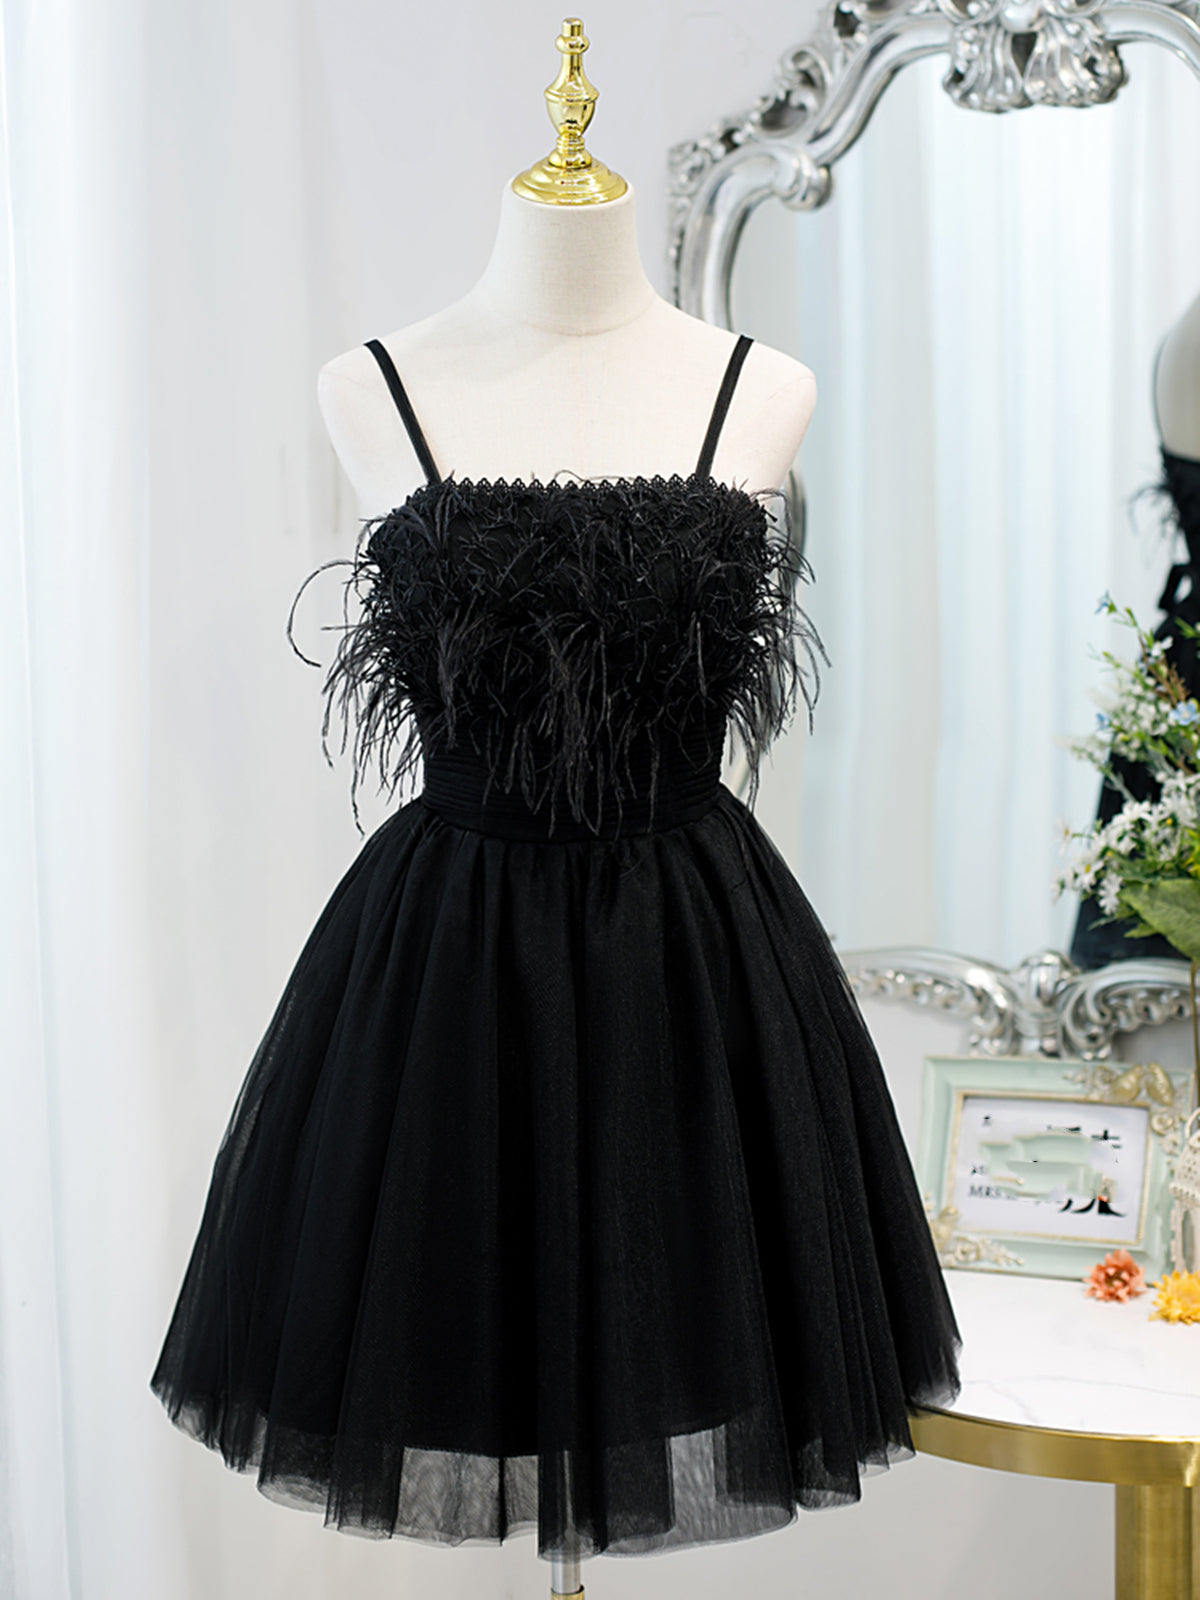 Party Dresses Winter, Short Back Prom Dress with Corset Back, Little Black Formal Homecoming Dresses